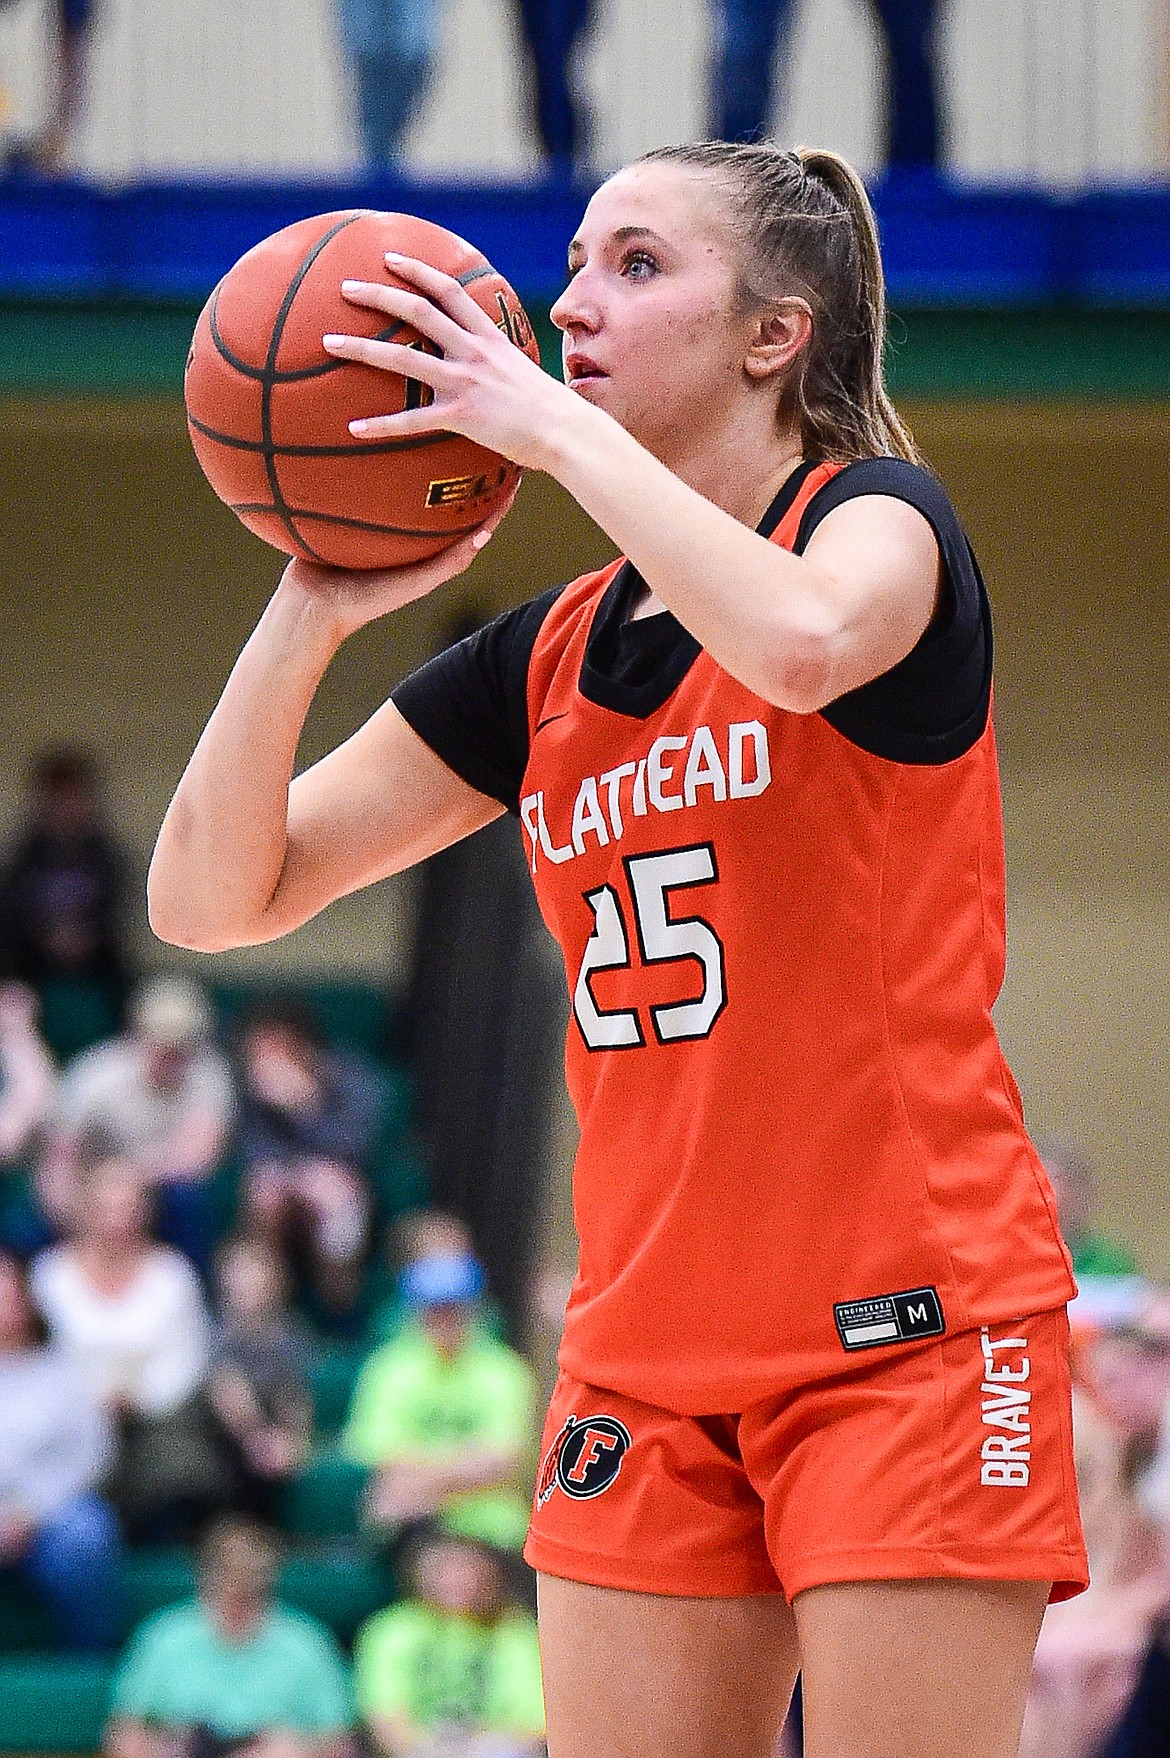 Flathead's Chloe Converse (25) looks to shoot in the second half against Glacier at Glacier High School on Thursday, Feb. 1. (Casey Kreider/Daily Inter Lake)